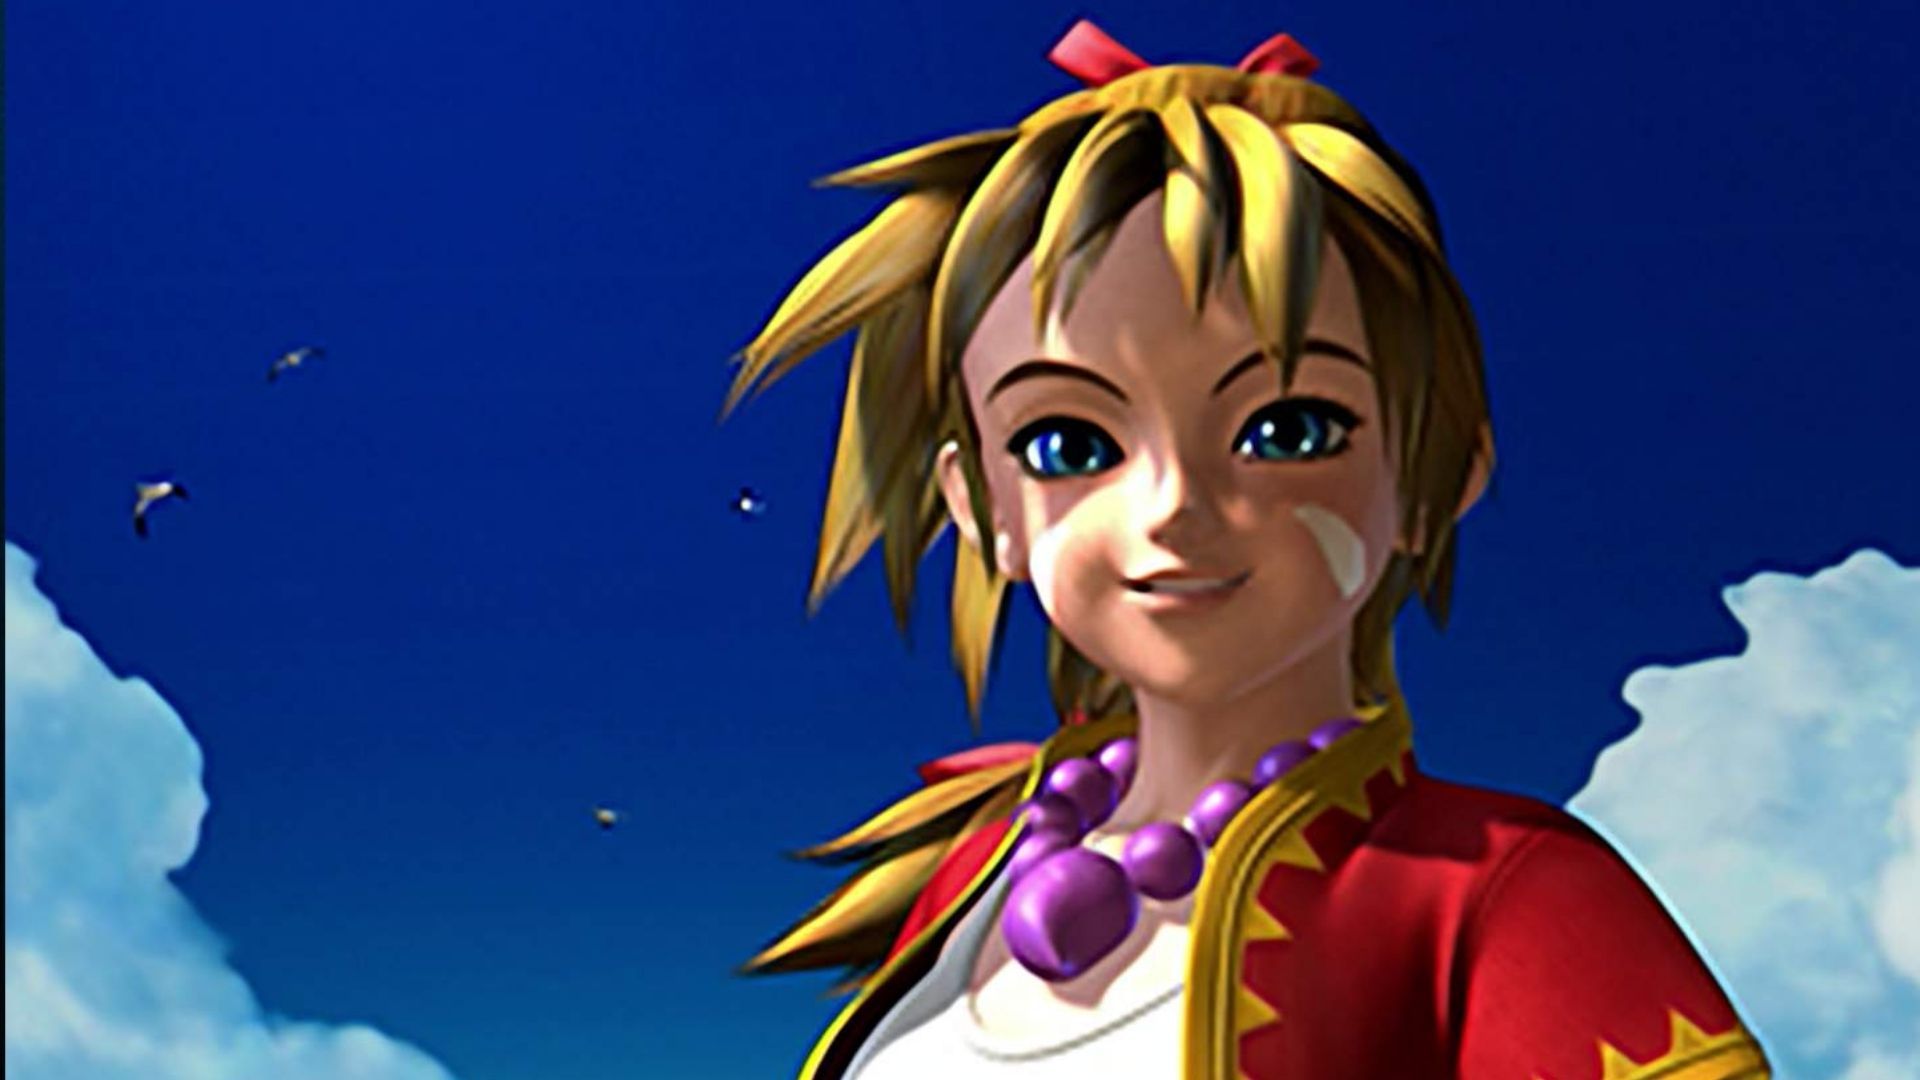 Video game release in April: Chrono Cross: The Radical Dreamers Edition